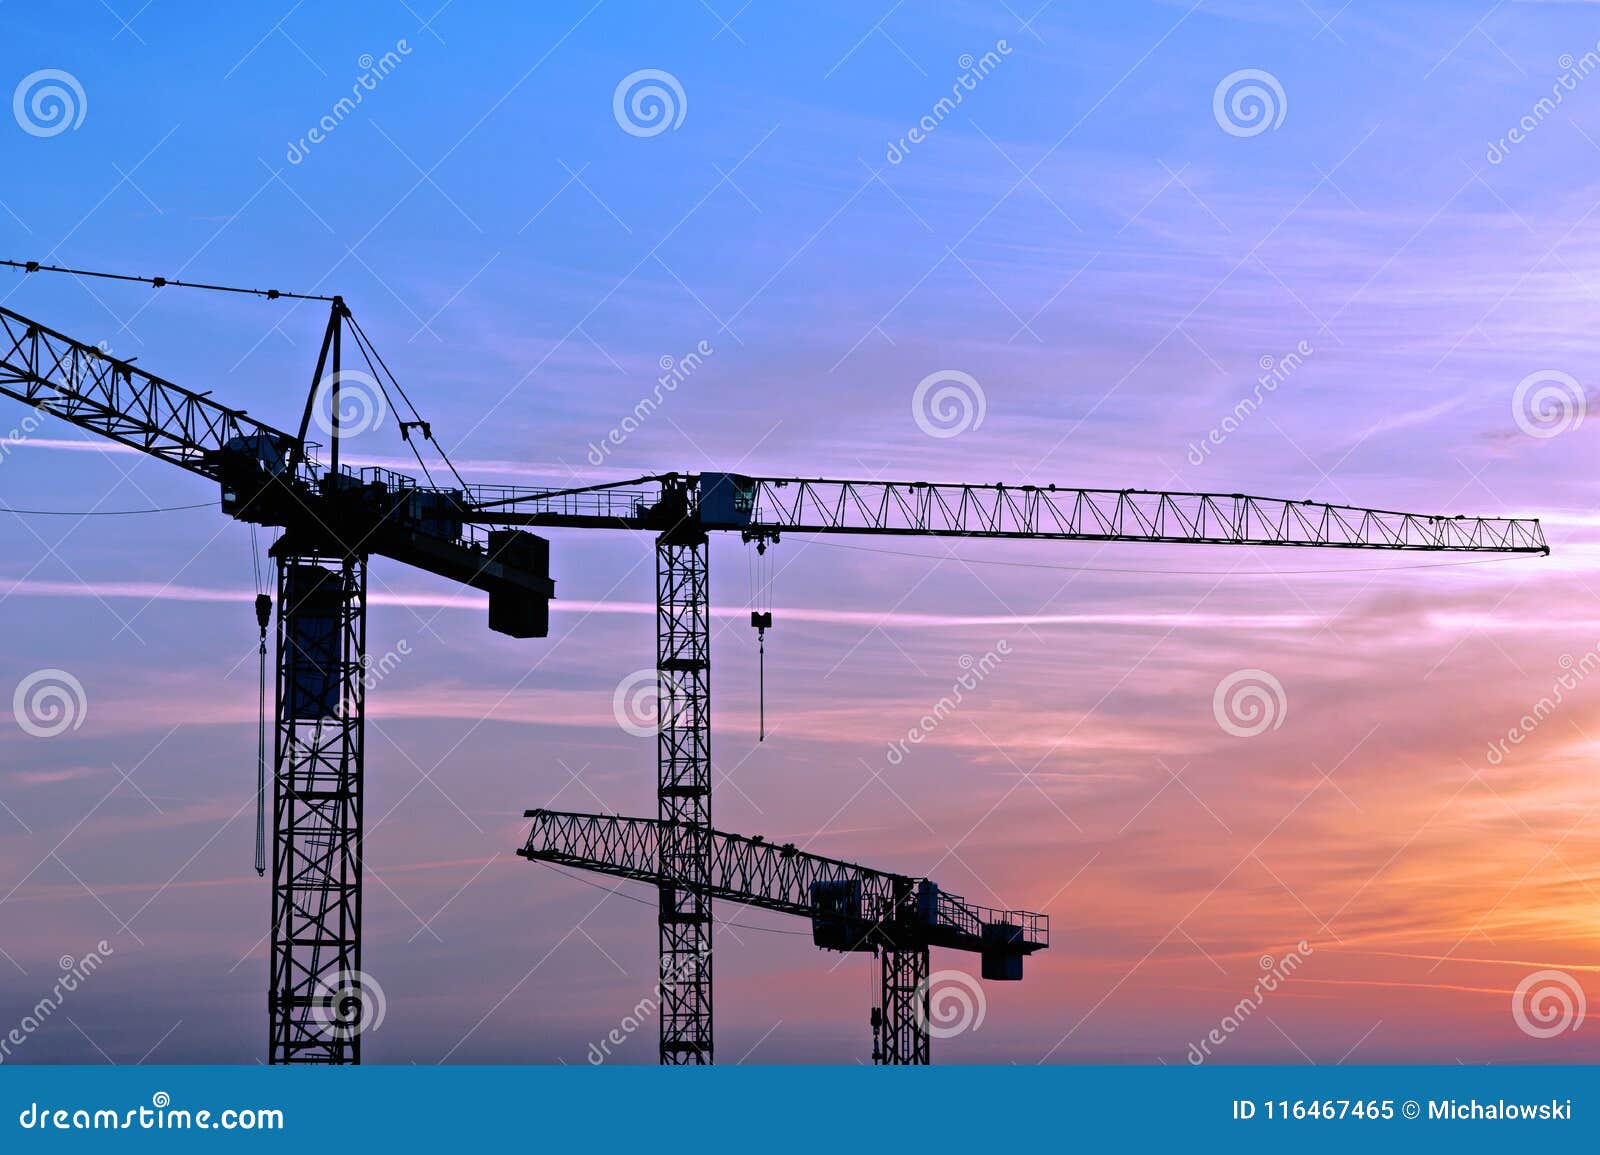 three cranes on the construction site of a new housing esta